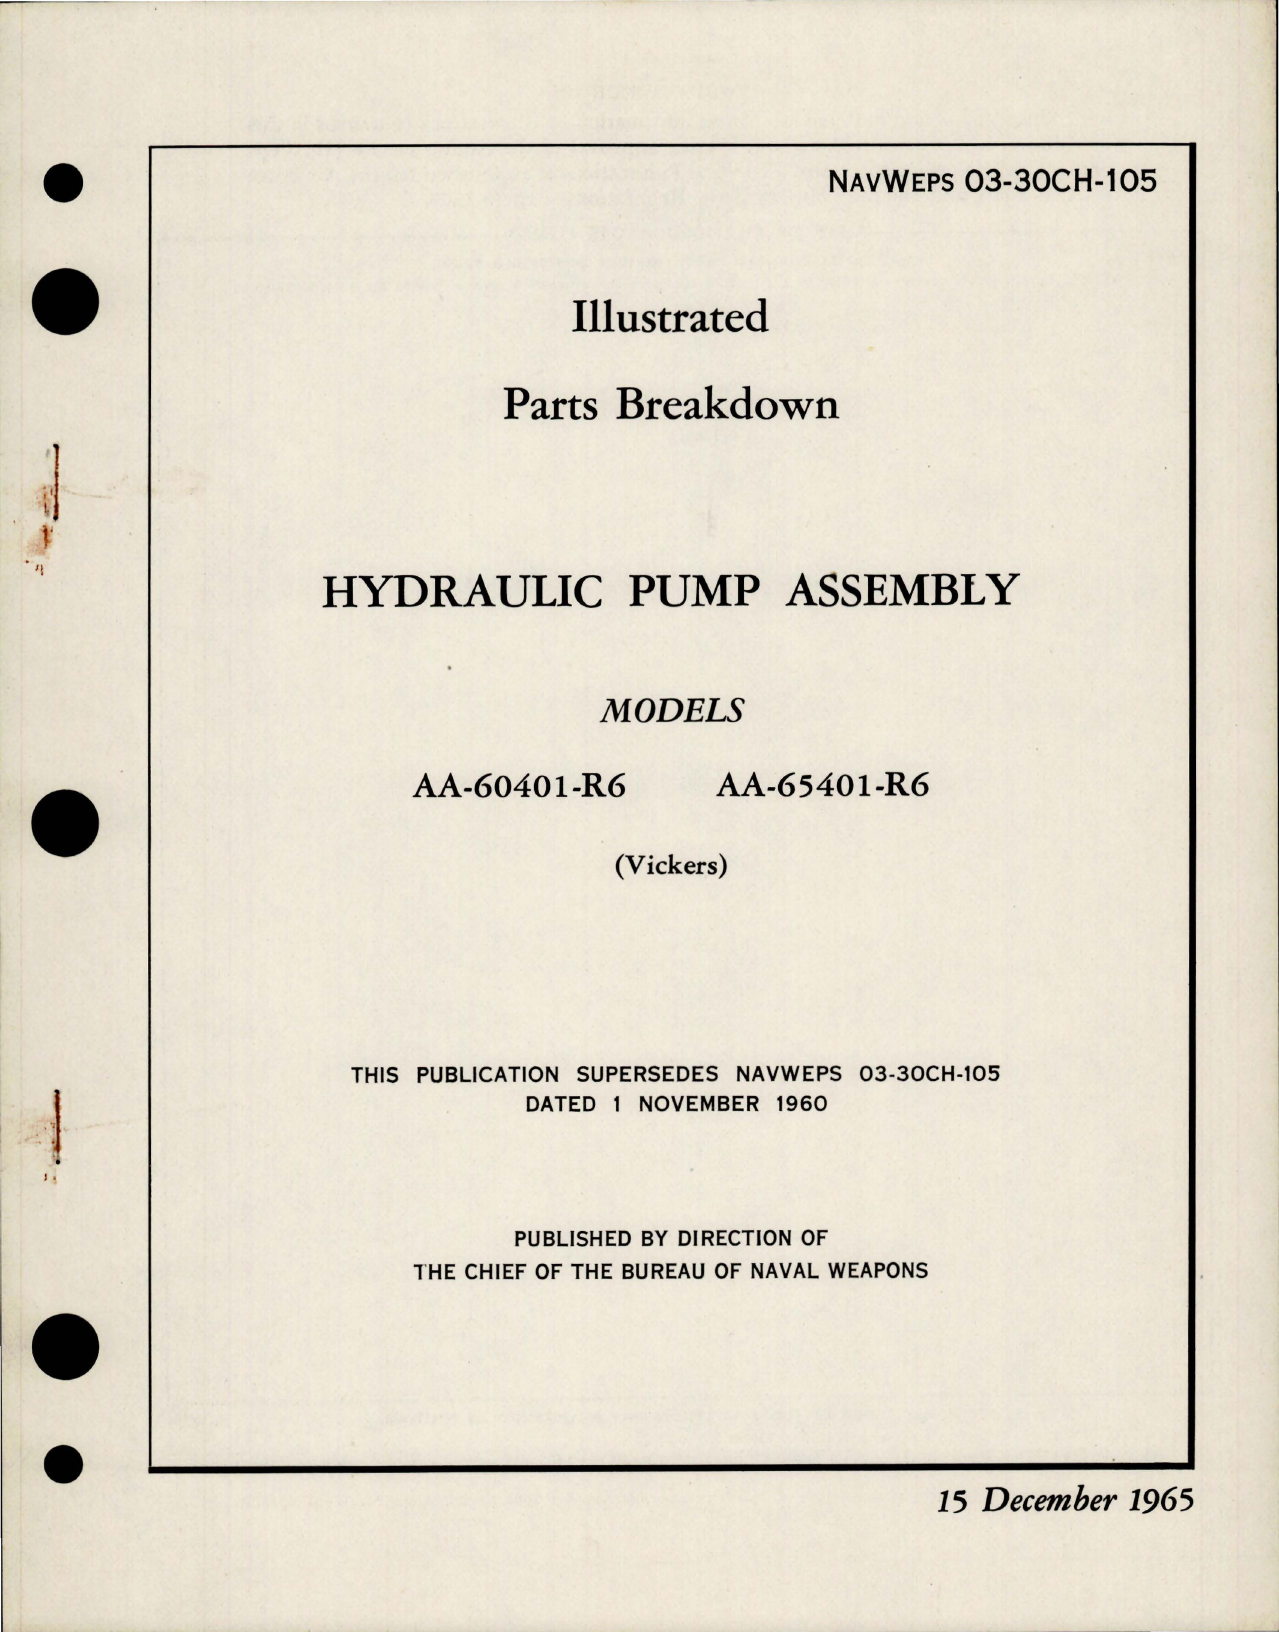 Sample page 1 from AirCorps Library document: Illustrated Parts Breakdown for Hydraulic Pump Assembly - Models AA-60401-R6 and AA-65401-R6 